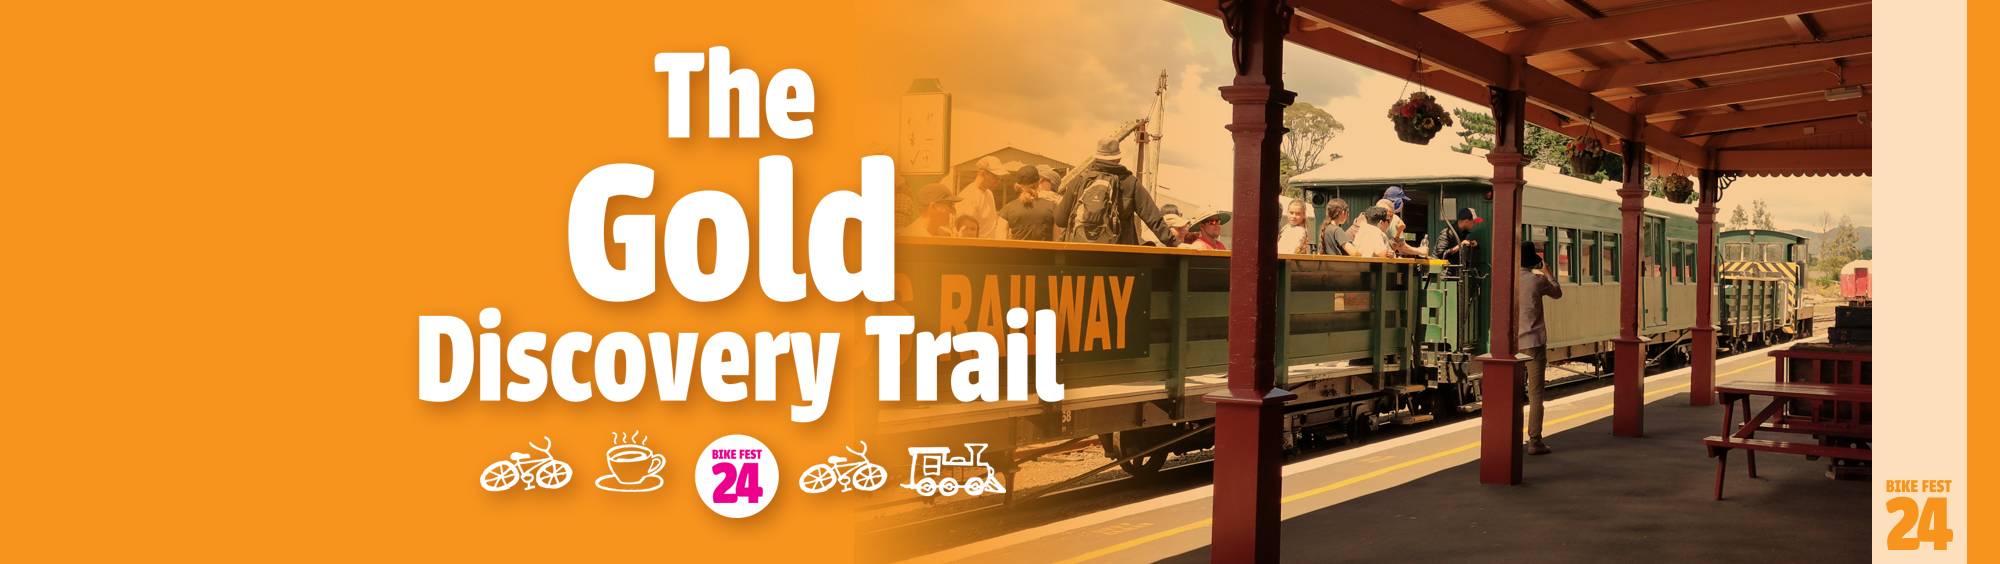 The Gold Discovery Trail